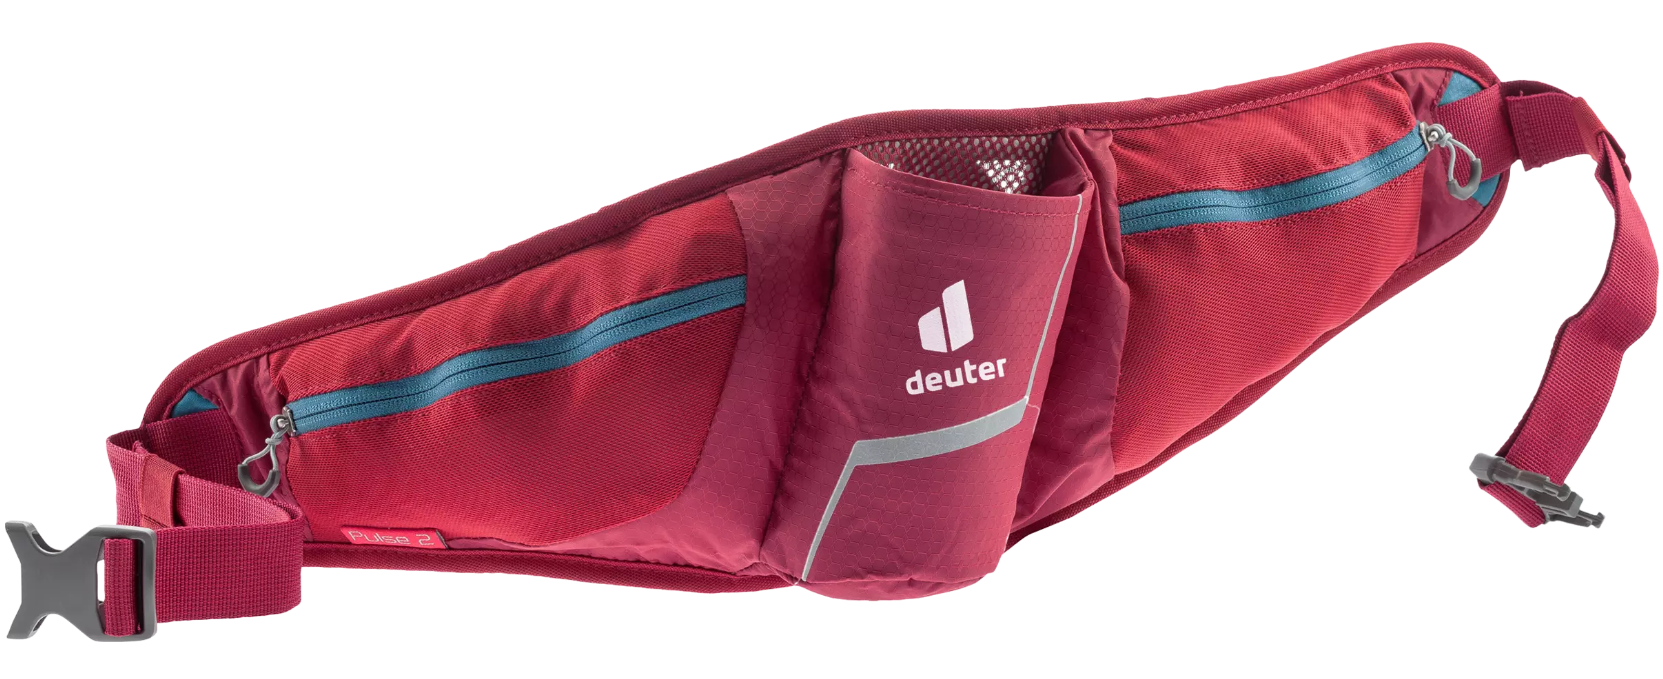 Deuter Pulse 2 Hip Bag as sold with empty water bottle pouch